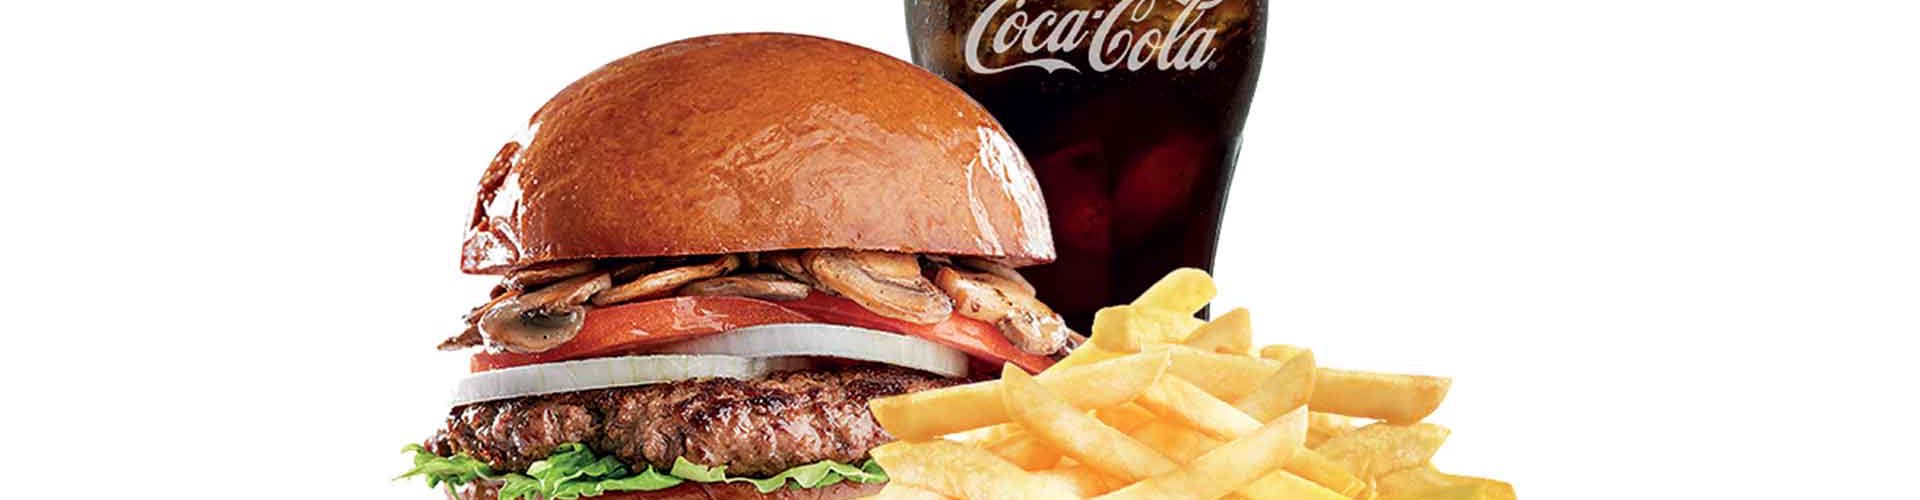 johny rocket burger served with cola and fries